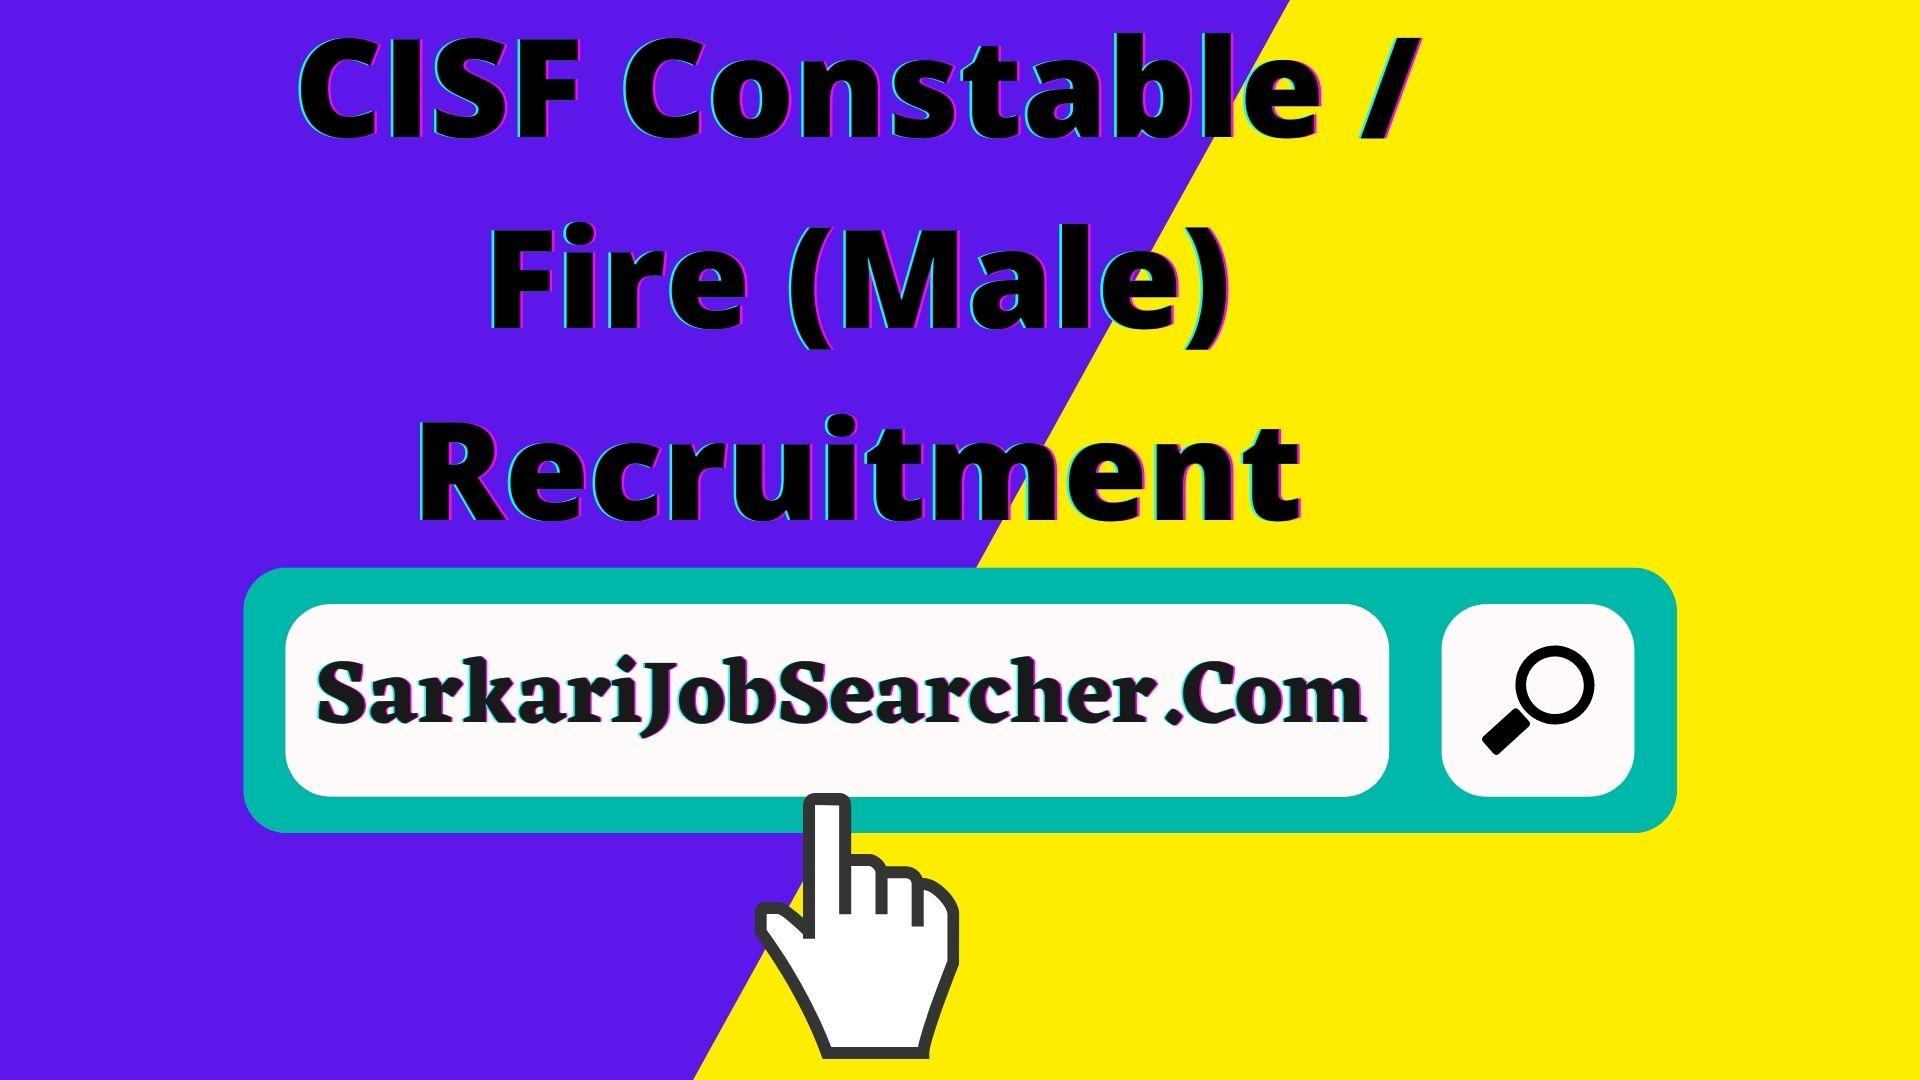 CISF Constable / Fire (Male) Recruitment 2022 – Central Industrial Security Force (CISF) invites online application for Constable / Fire (Male) 1149 Vacancy. Those candidates who are interested to apply must read the official notification before applying online. CISF Vacancy 2022, CISF Job 2022